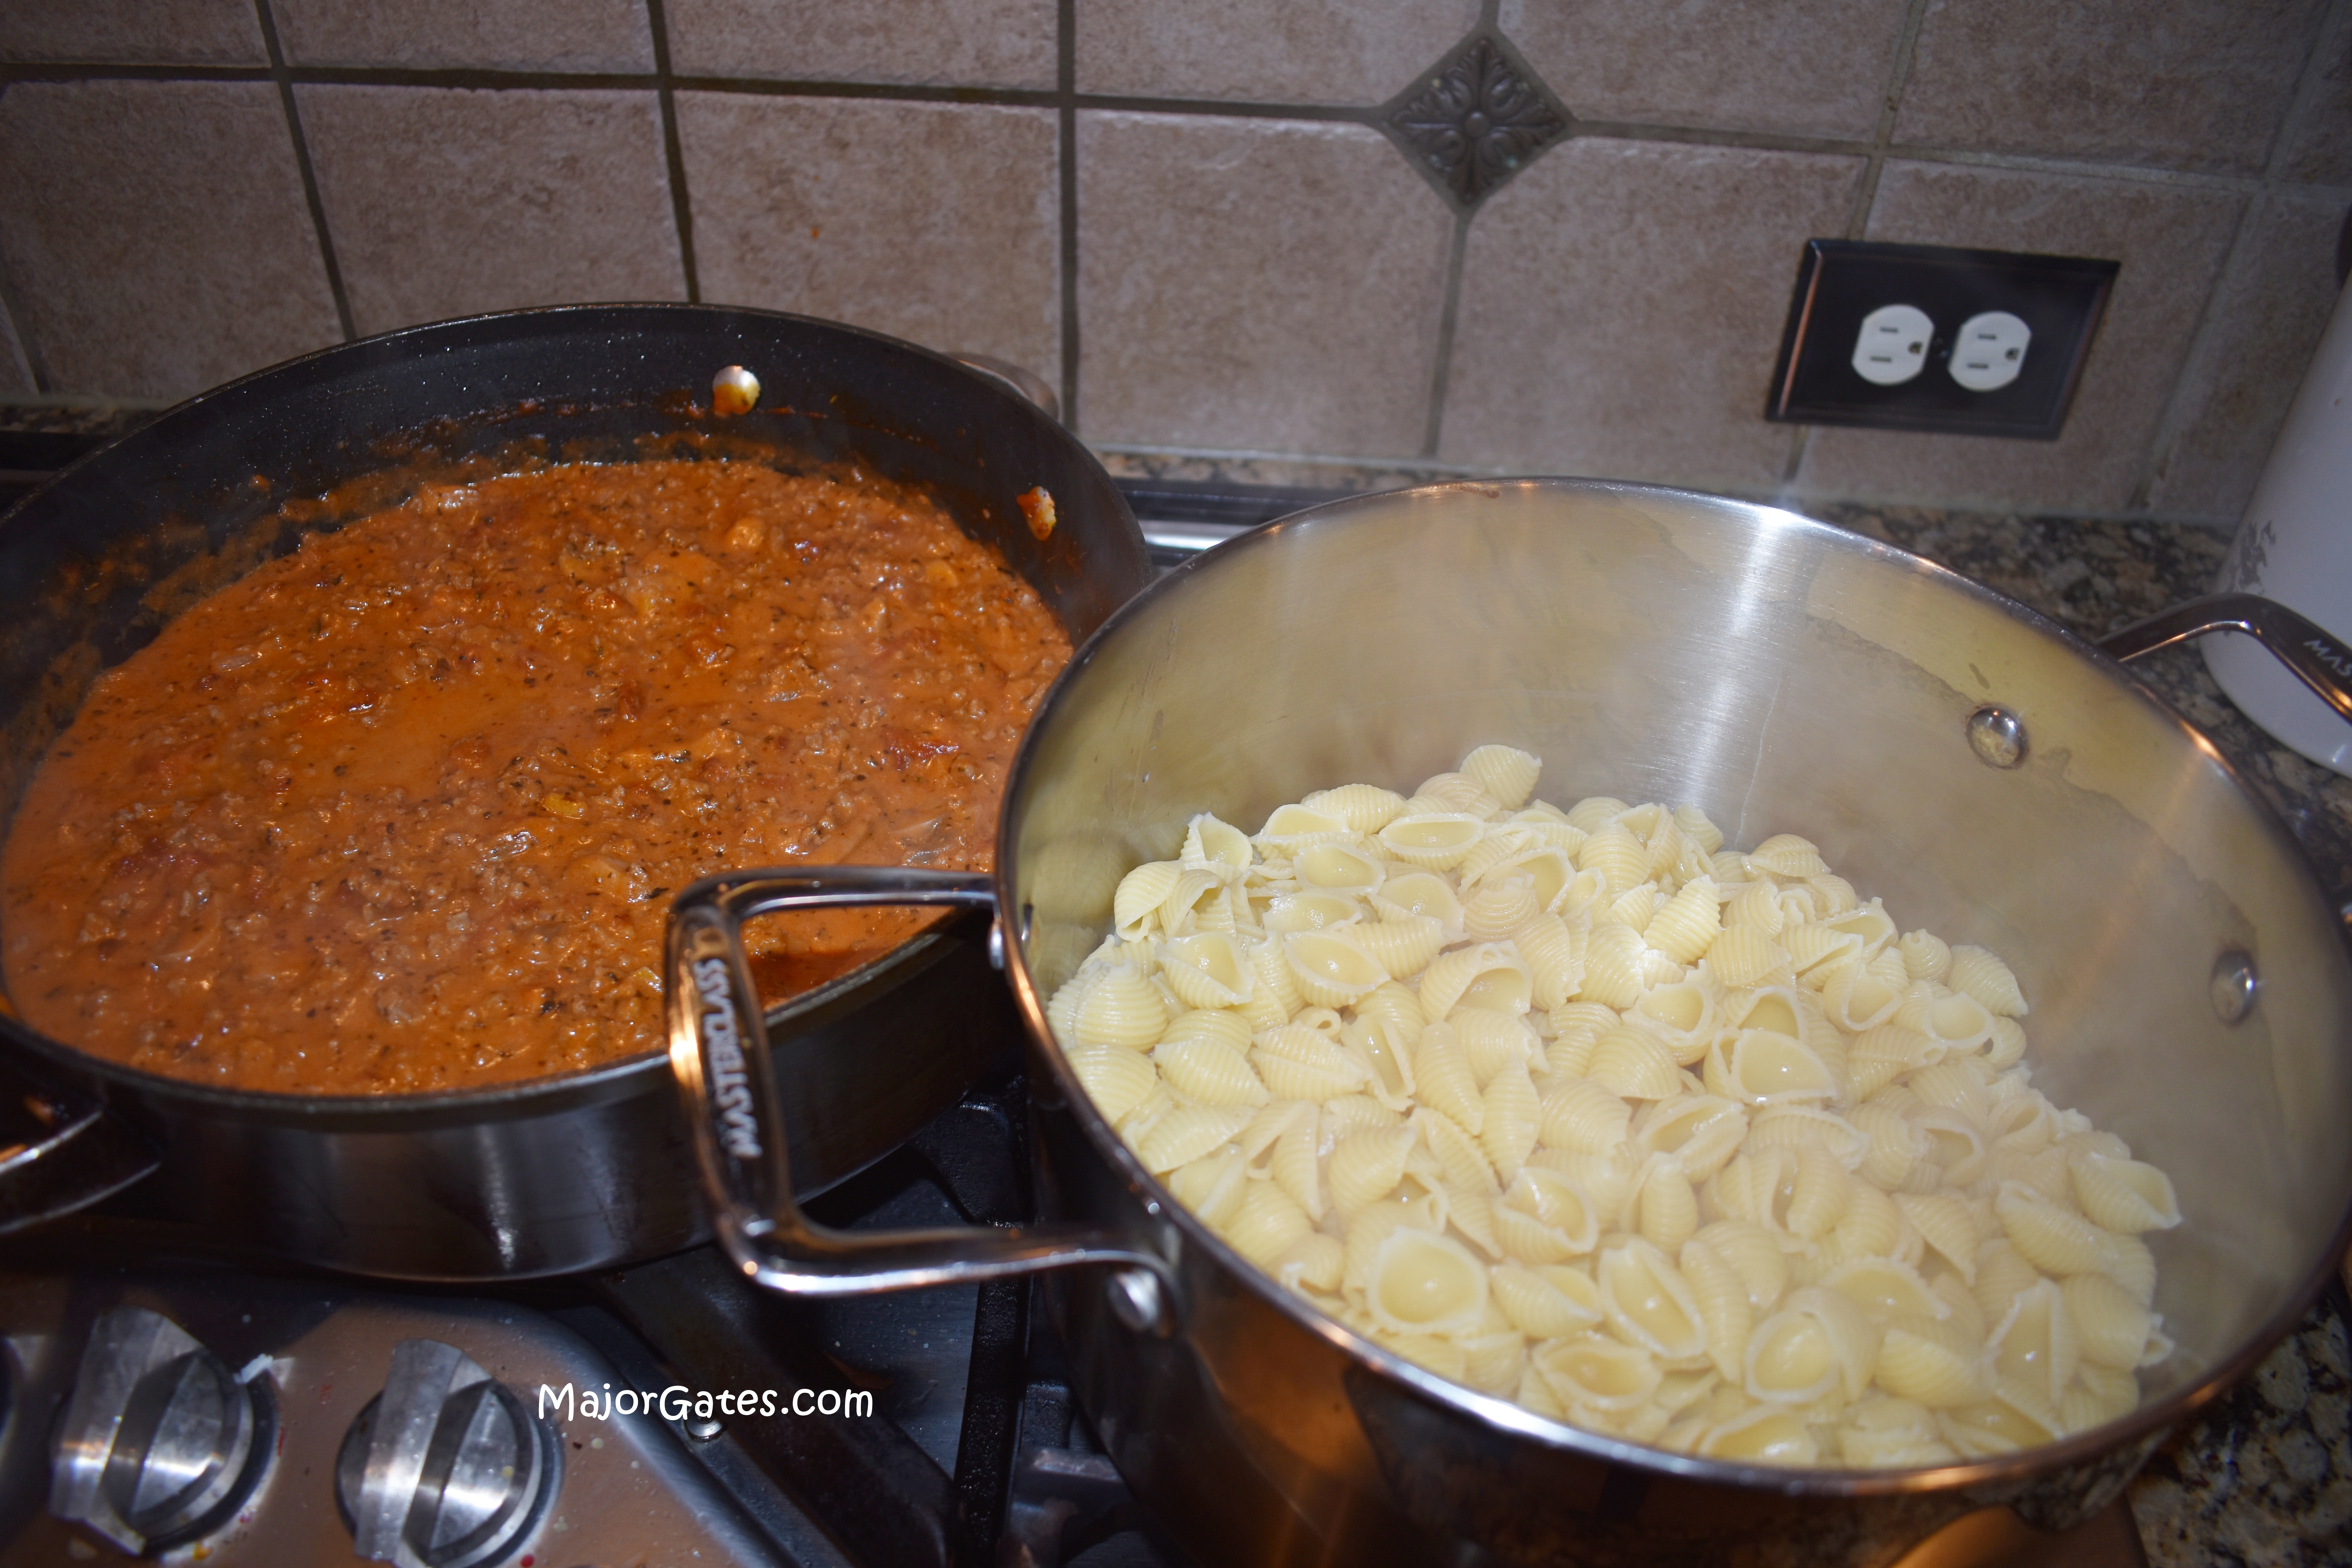 Mixing the pasta sauce and the pasta shells